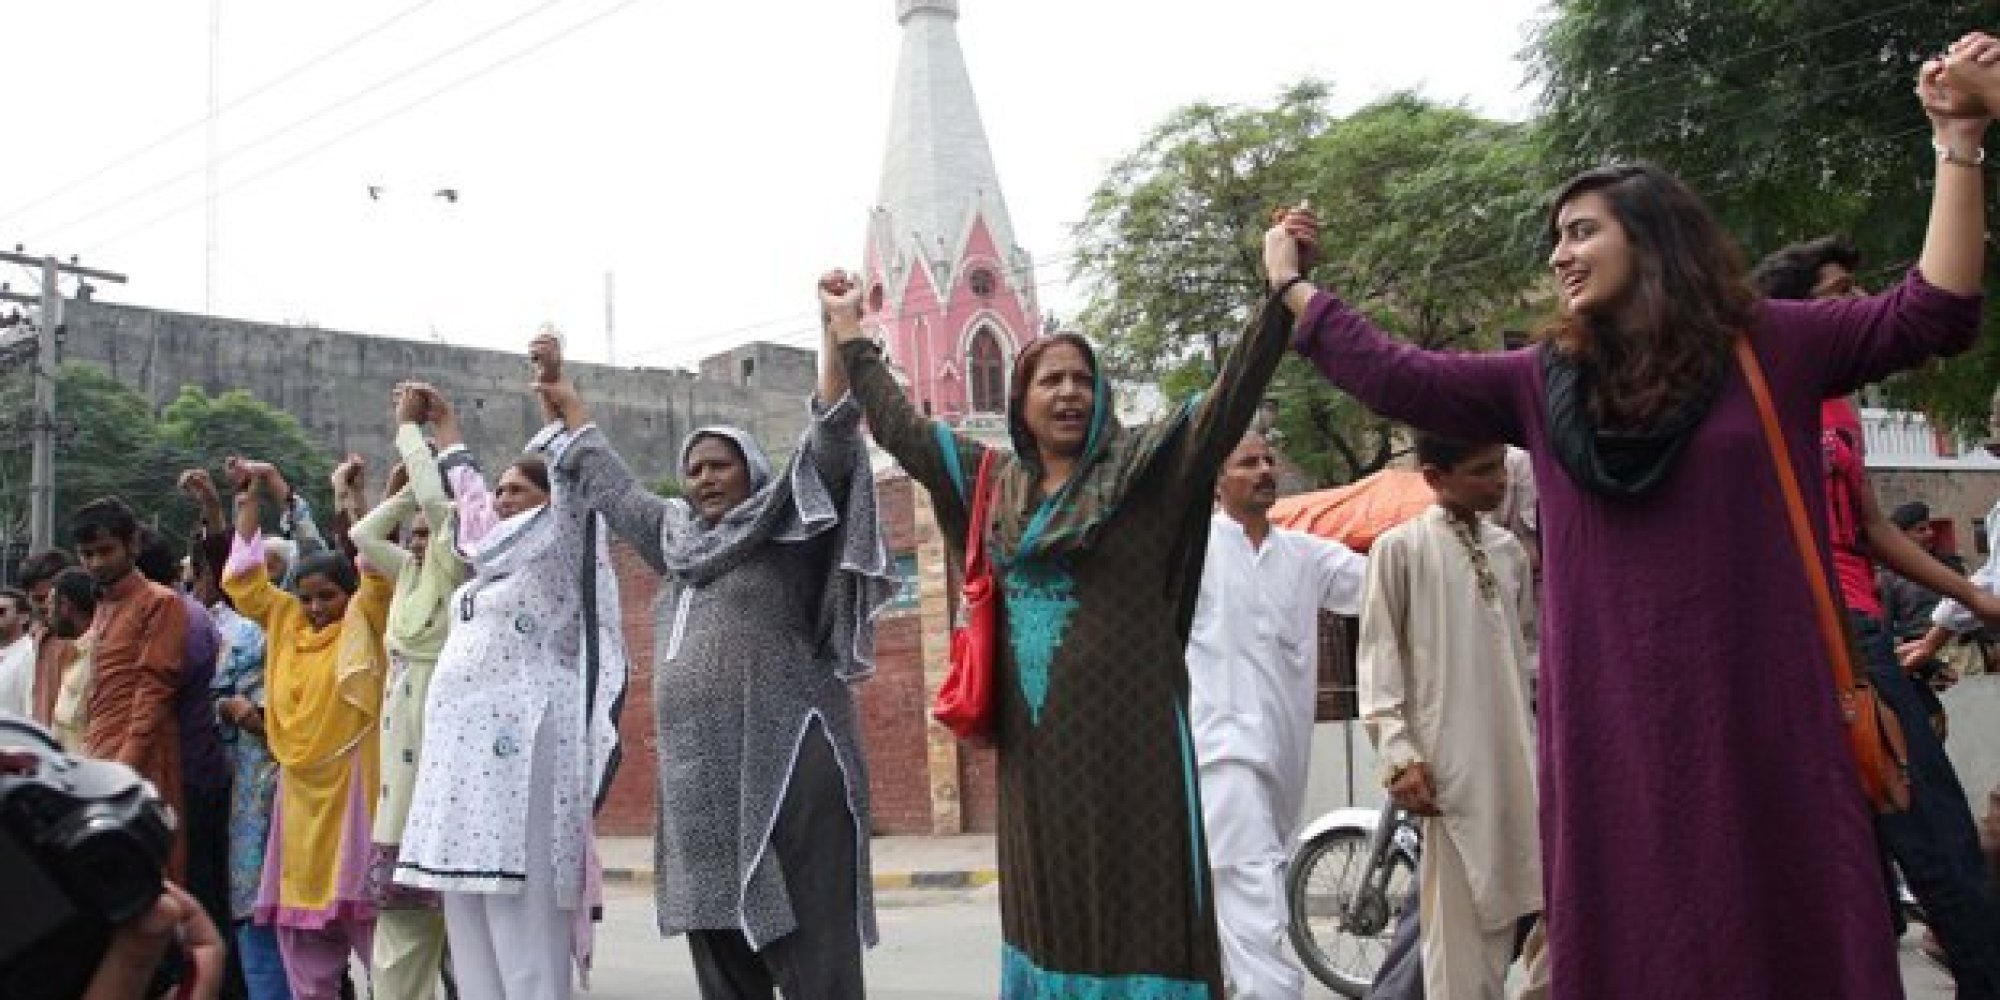 Pakistani Muslims form a human chain to protect Christians during Mass. 2013